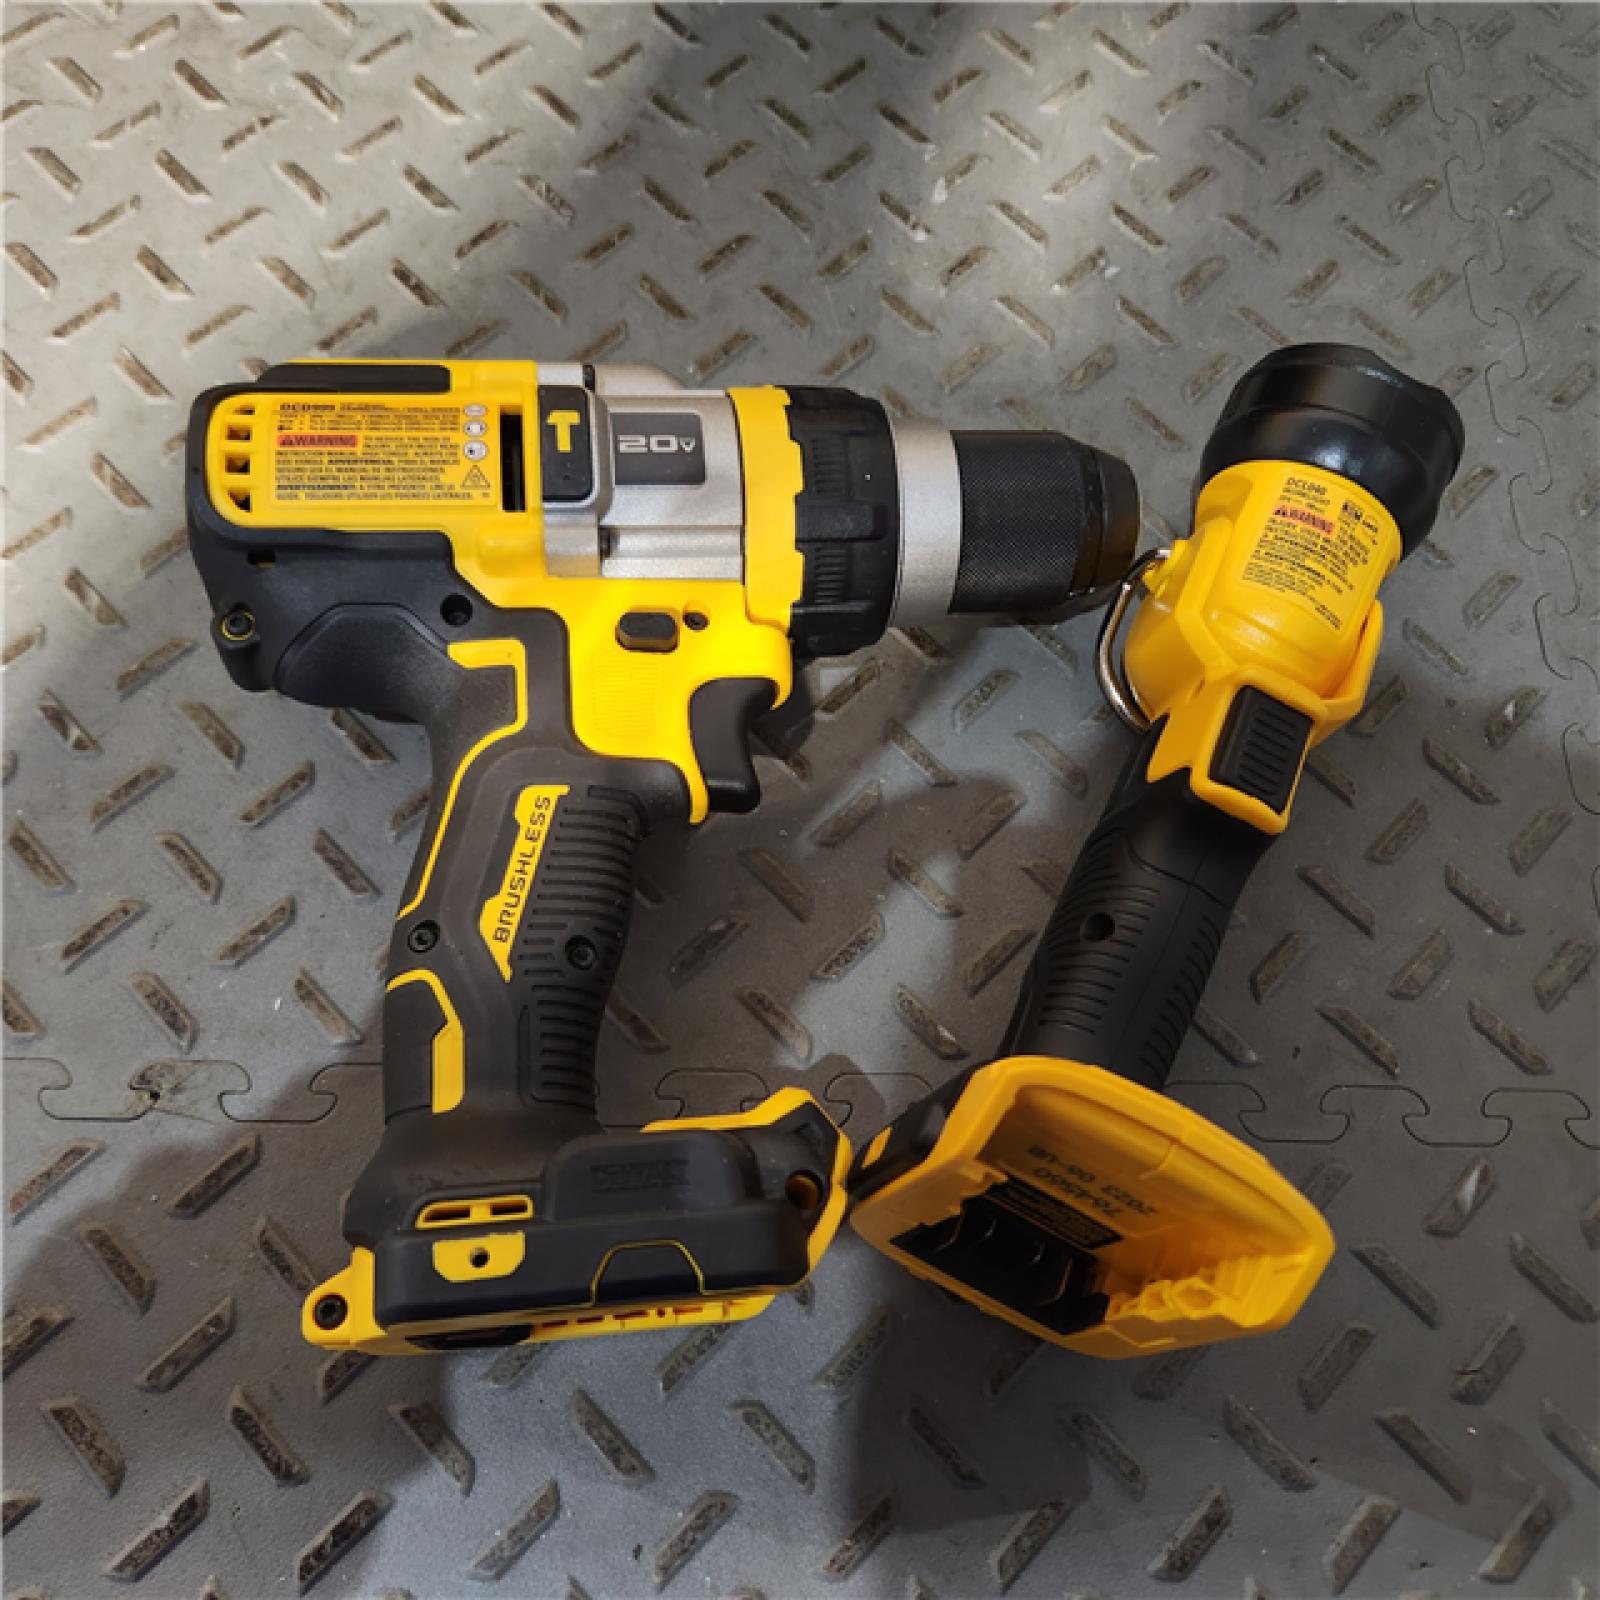 HOUSTON Location-AS-IS-DEWALT 20V MAX Lithium-Ion Cordless 3-Tool Combo Kit with 5.0 Ah Battery and 1.7 Ah Battery APPEARS IN NEW Condition